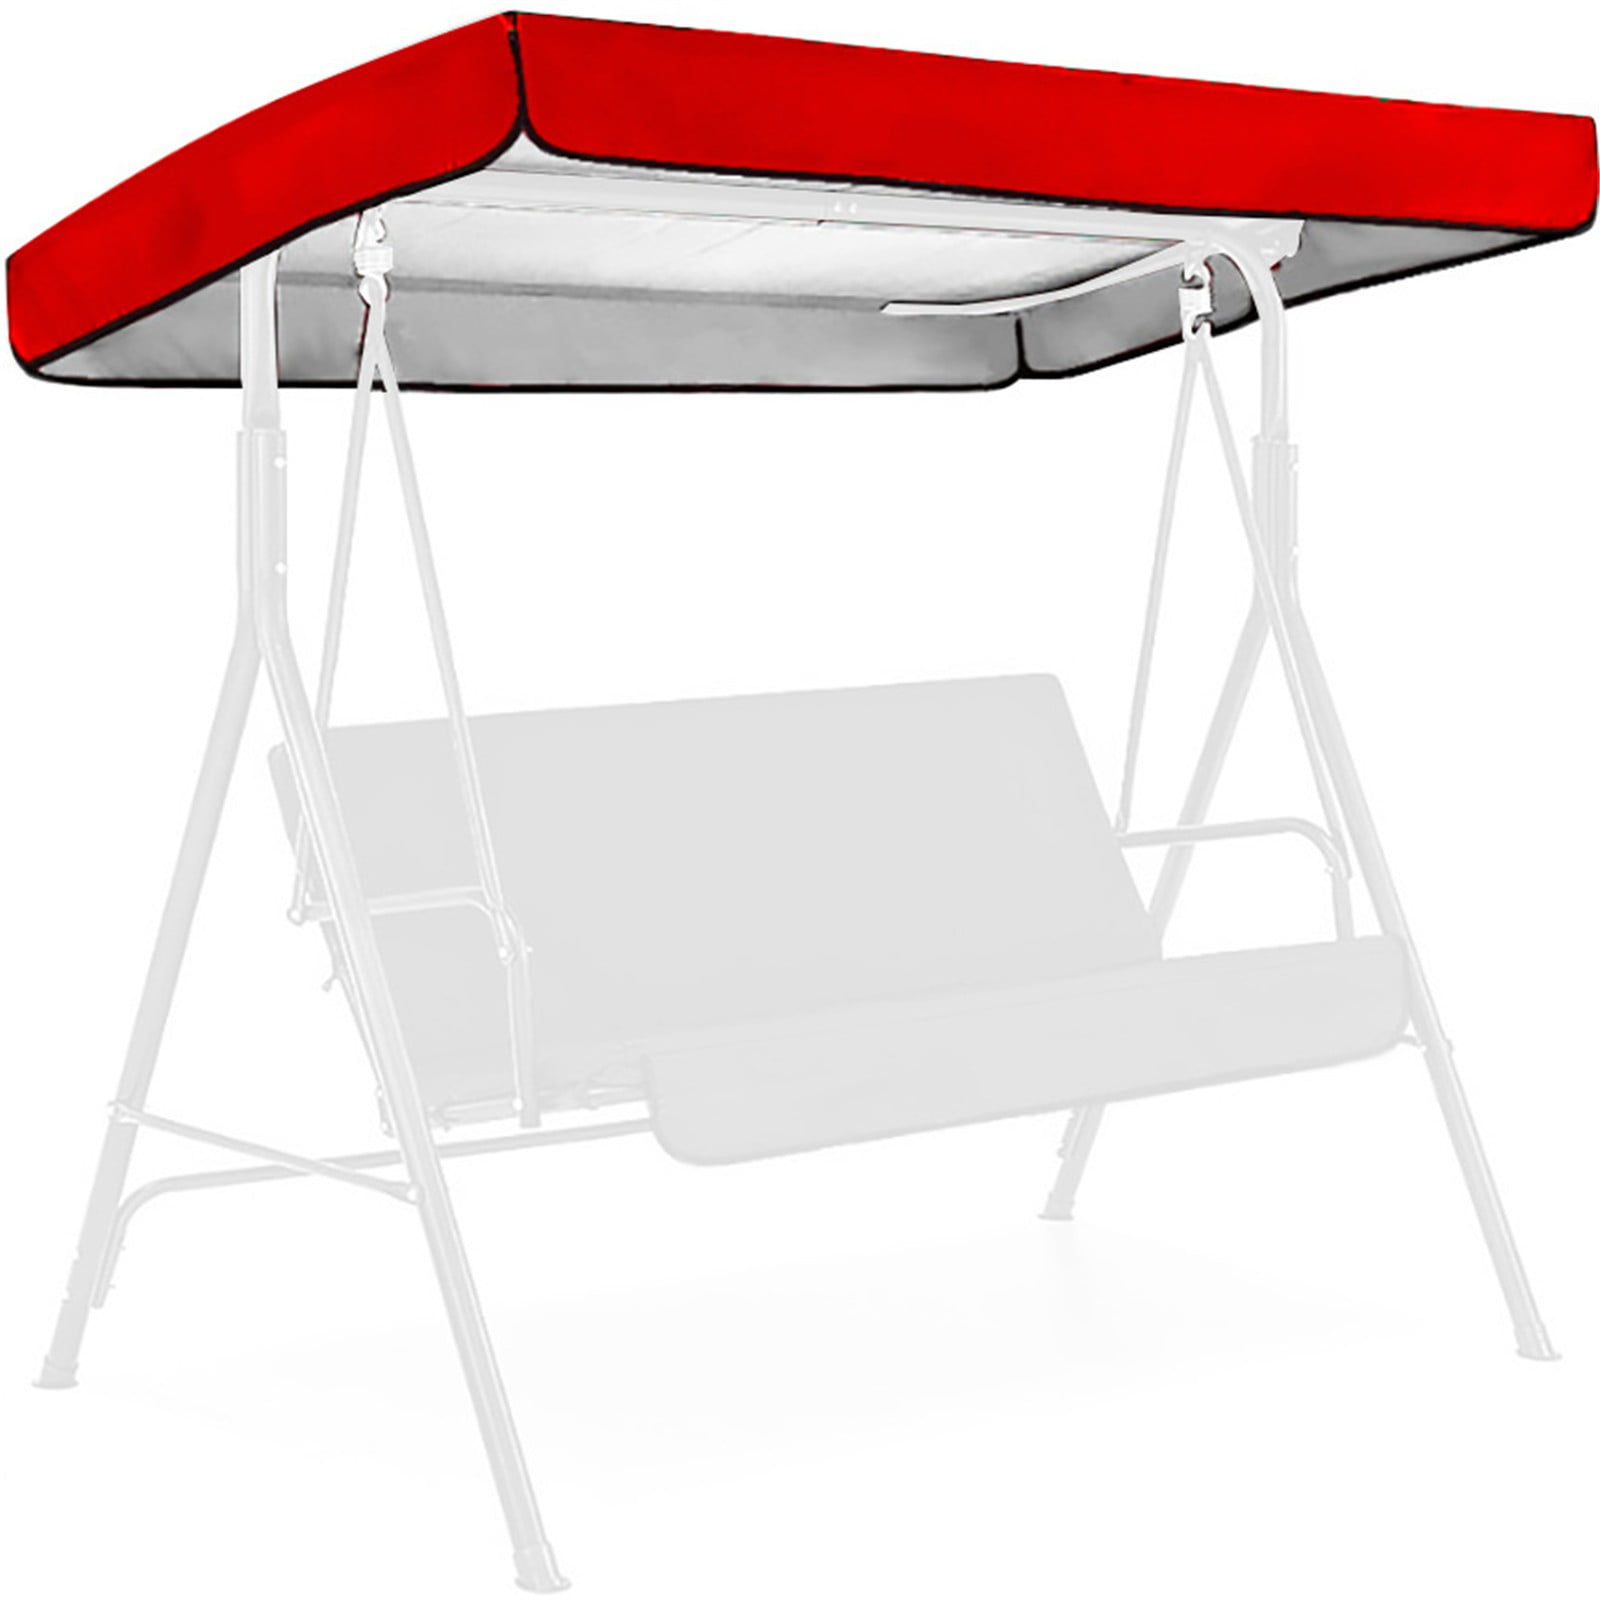 75x45 Top Cover Only jesticam 3 Person Swing Canopy Replacement Waterproof Top Cover for Outdoor Garden Patio Porch Yard 